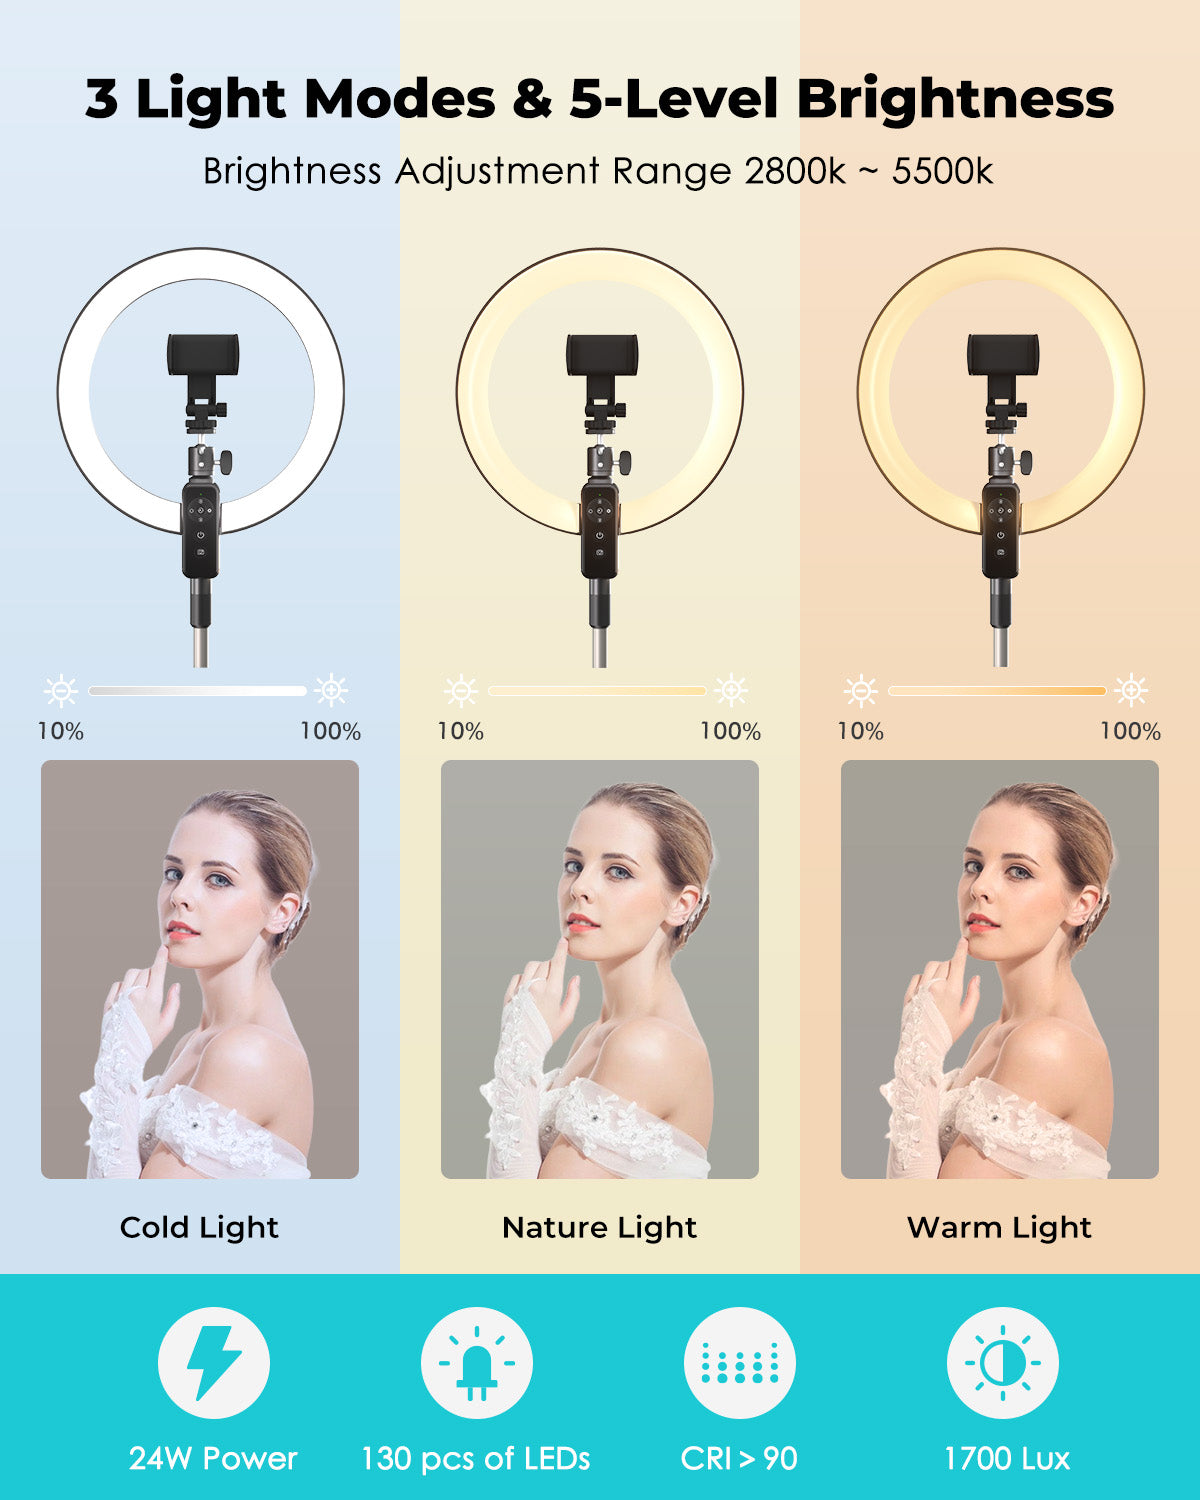 Viozon 12&#39;&#39; Ring Light with Extendable 79&#39;&#39; Tripod, Compatible with 3.5-6.7&#39;&#39; Phone &amp;DSLR,Remote Control,Dimmable LED Selfie Circle Lights(LT-2LH)